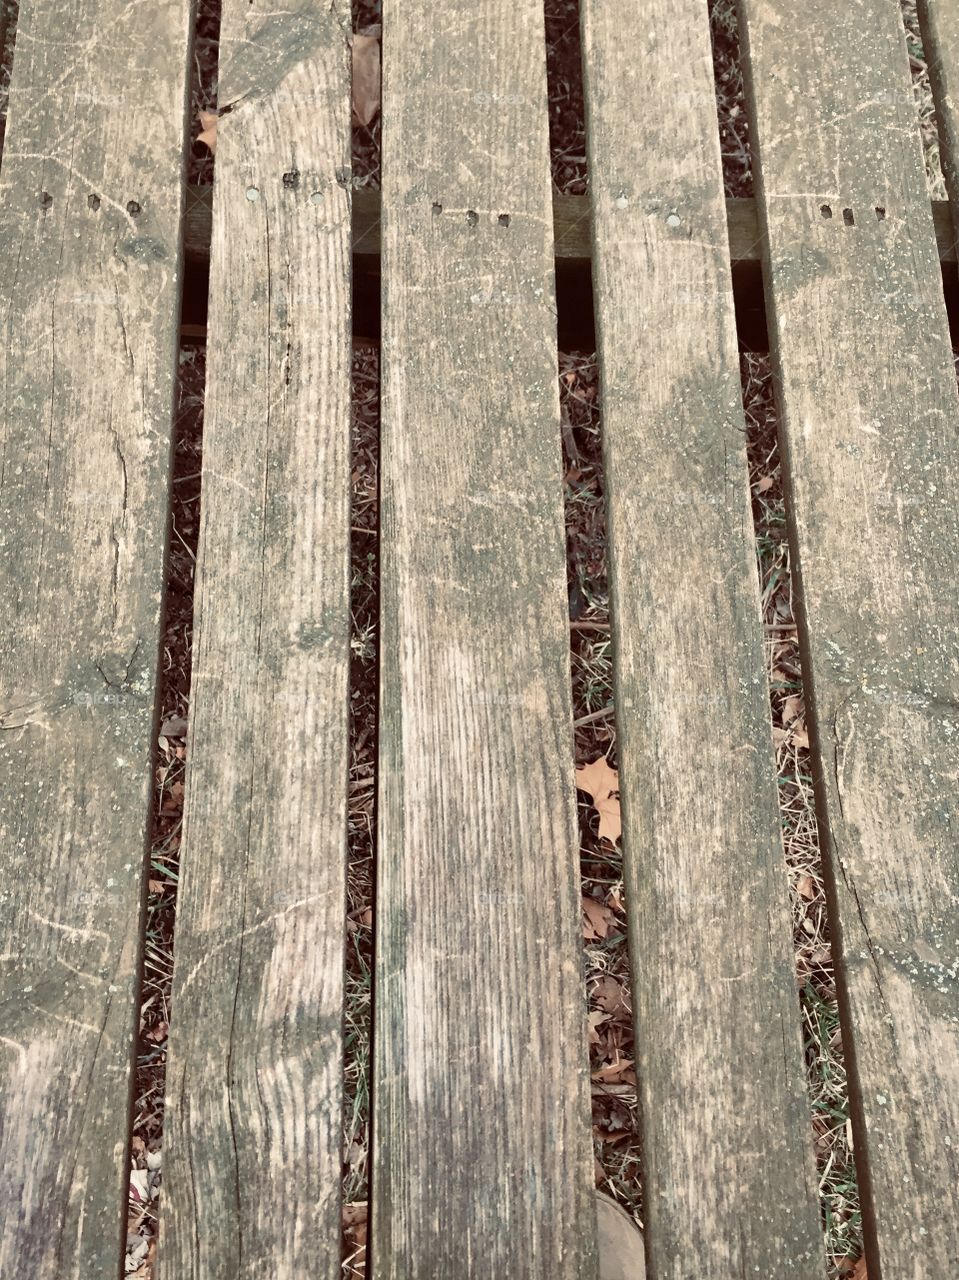 I thought the leaves on the ground looked so interesting behind the slats of the swing.